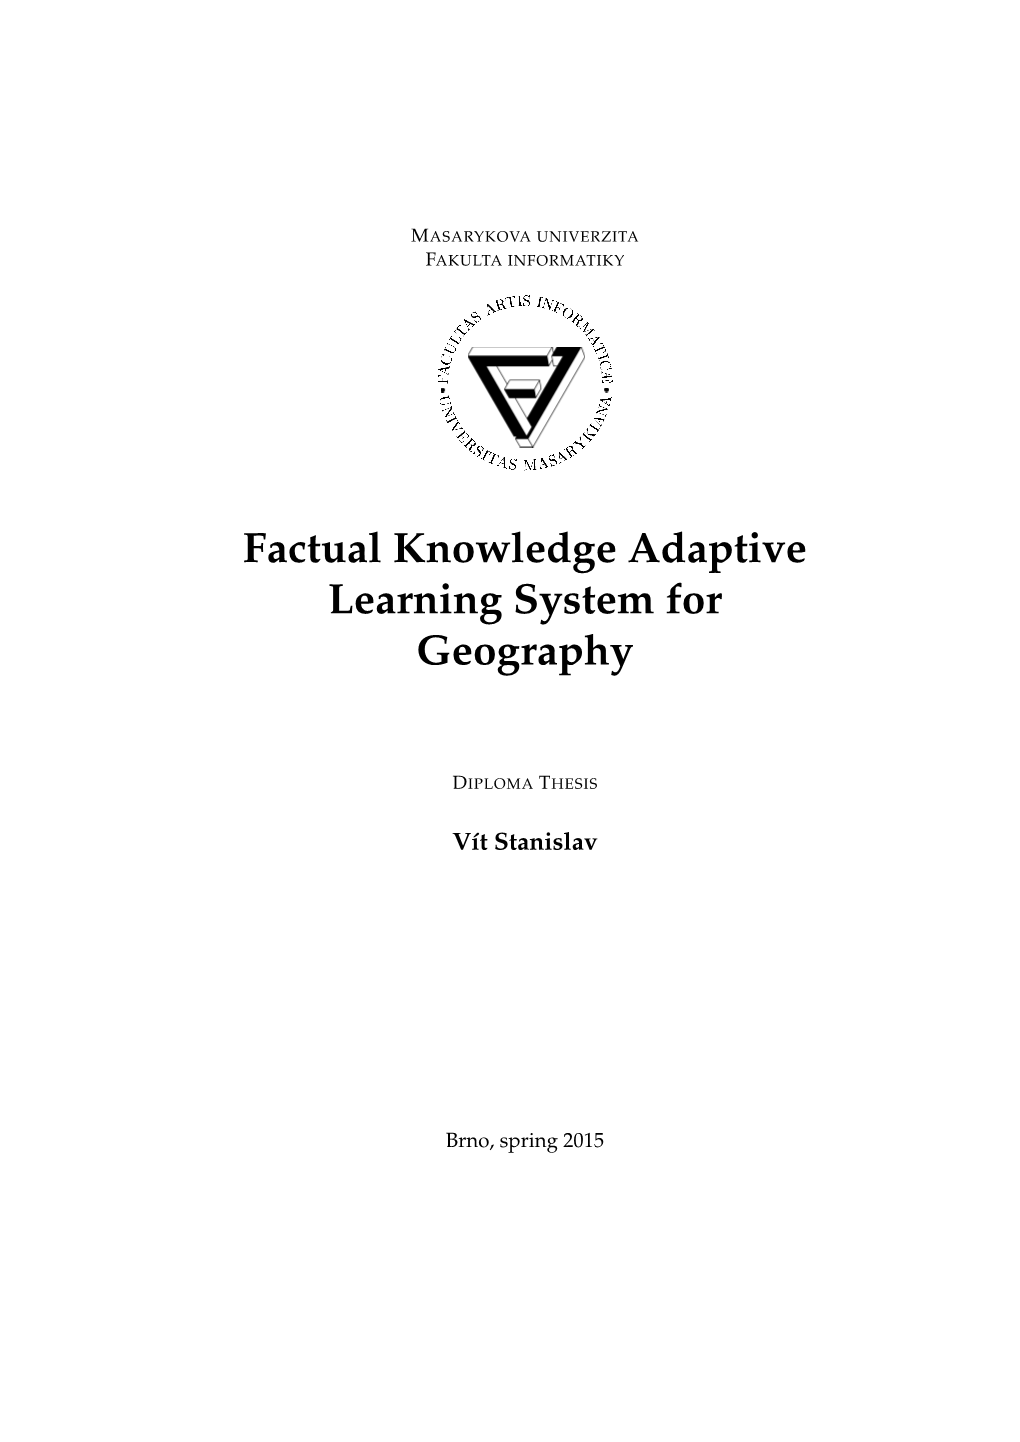 Factual Knowledge Adaptive Learning System for Geography